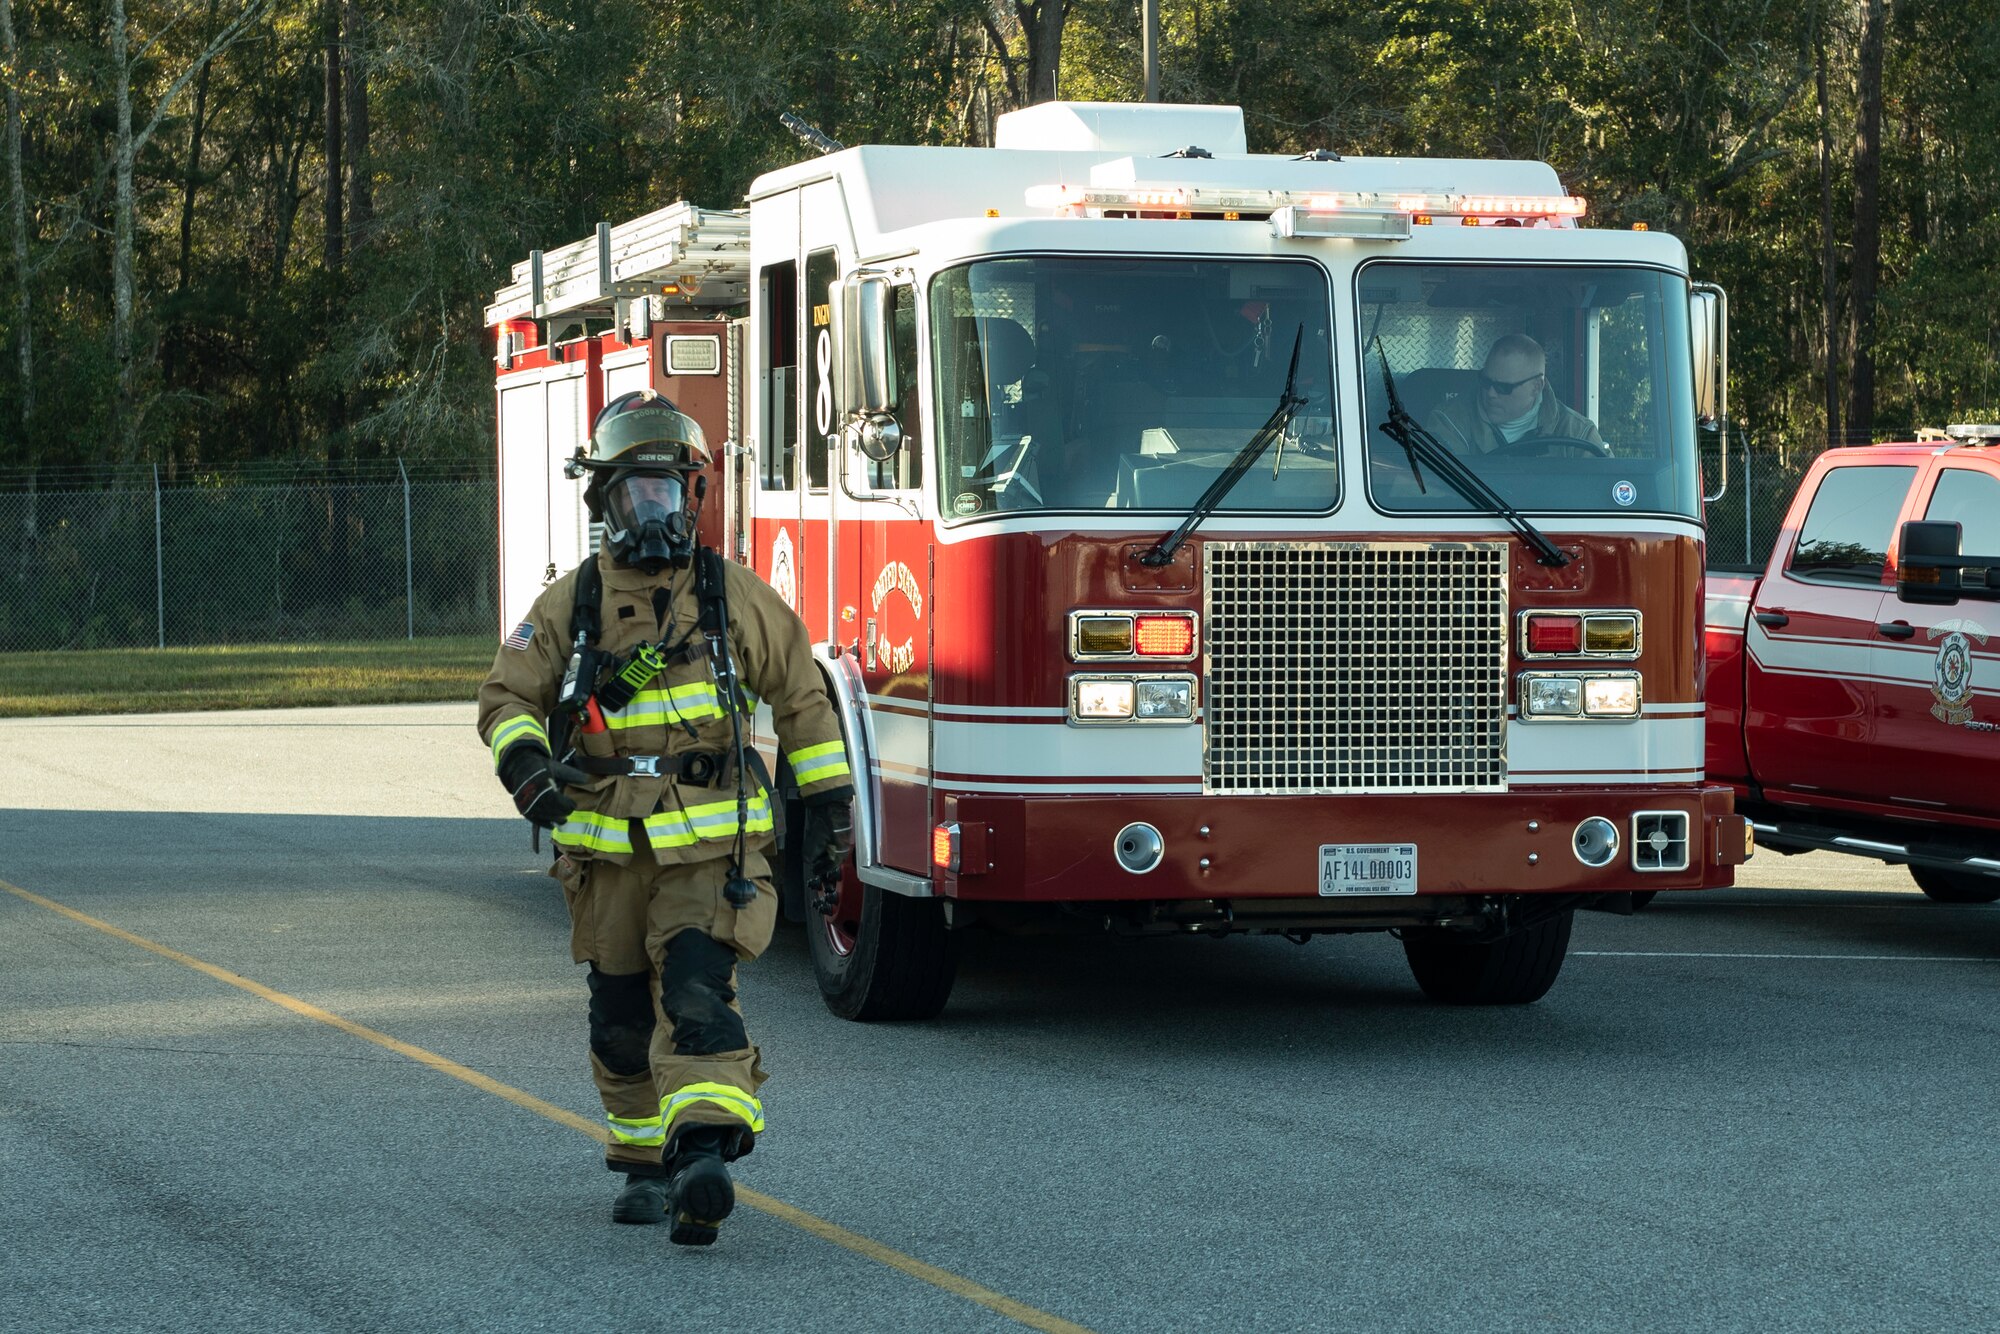 A photo of an Airman and the fire department arriving on scene during an evacuation drill.